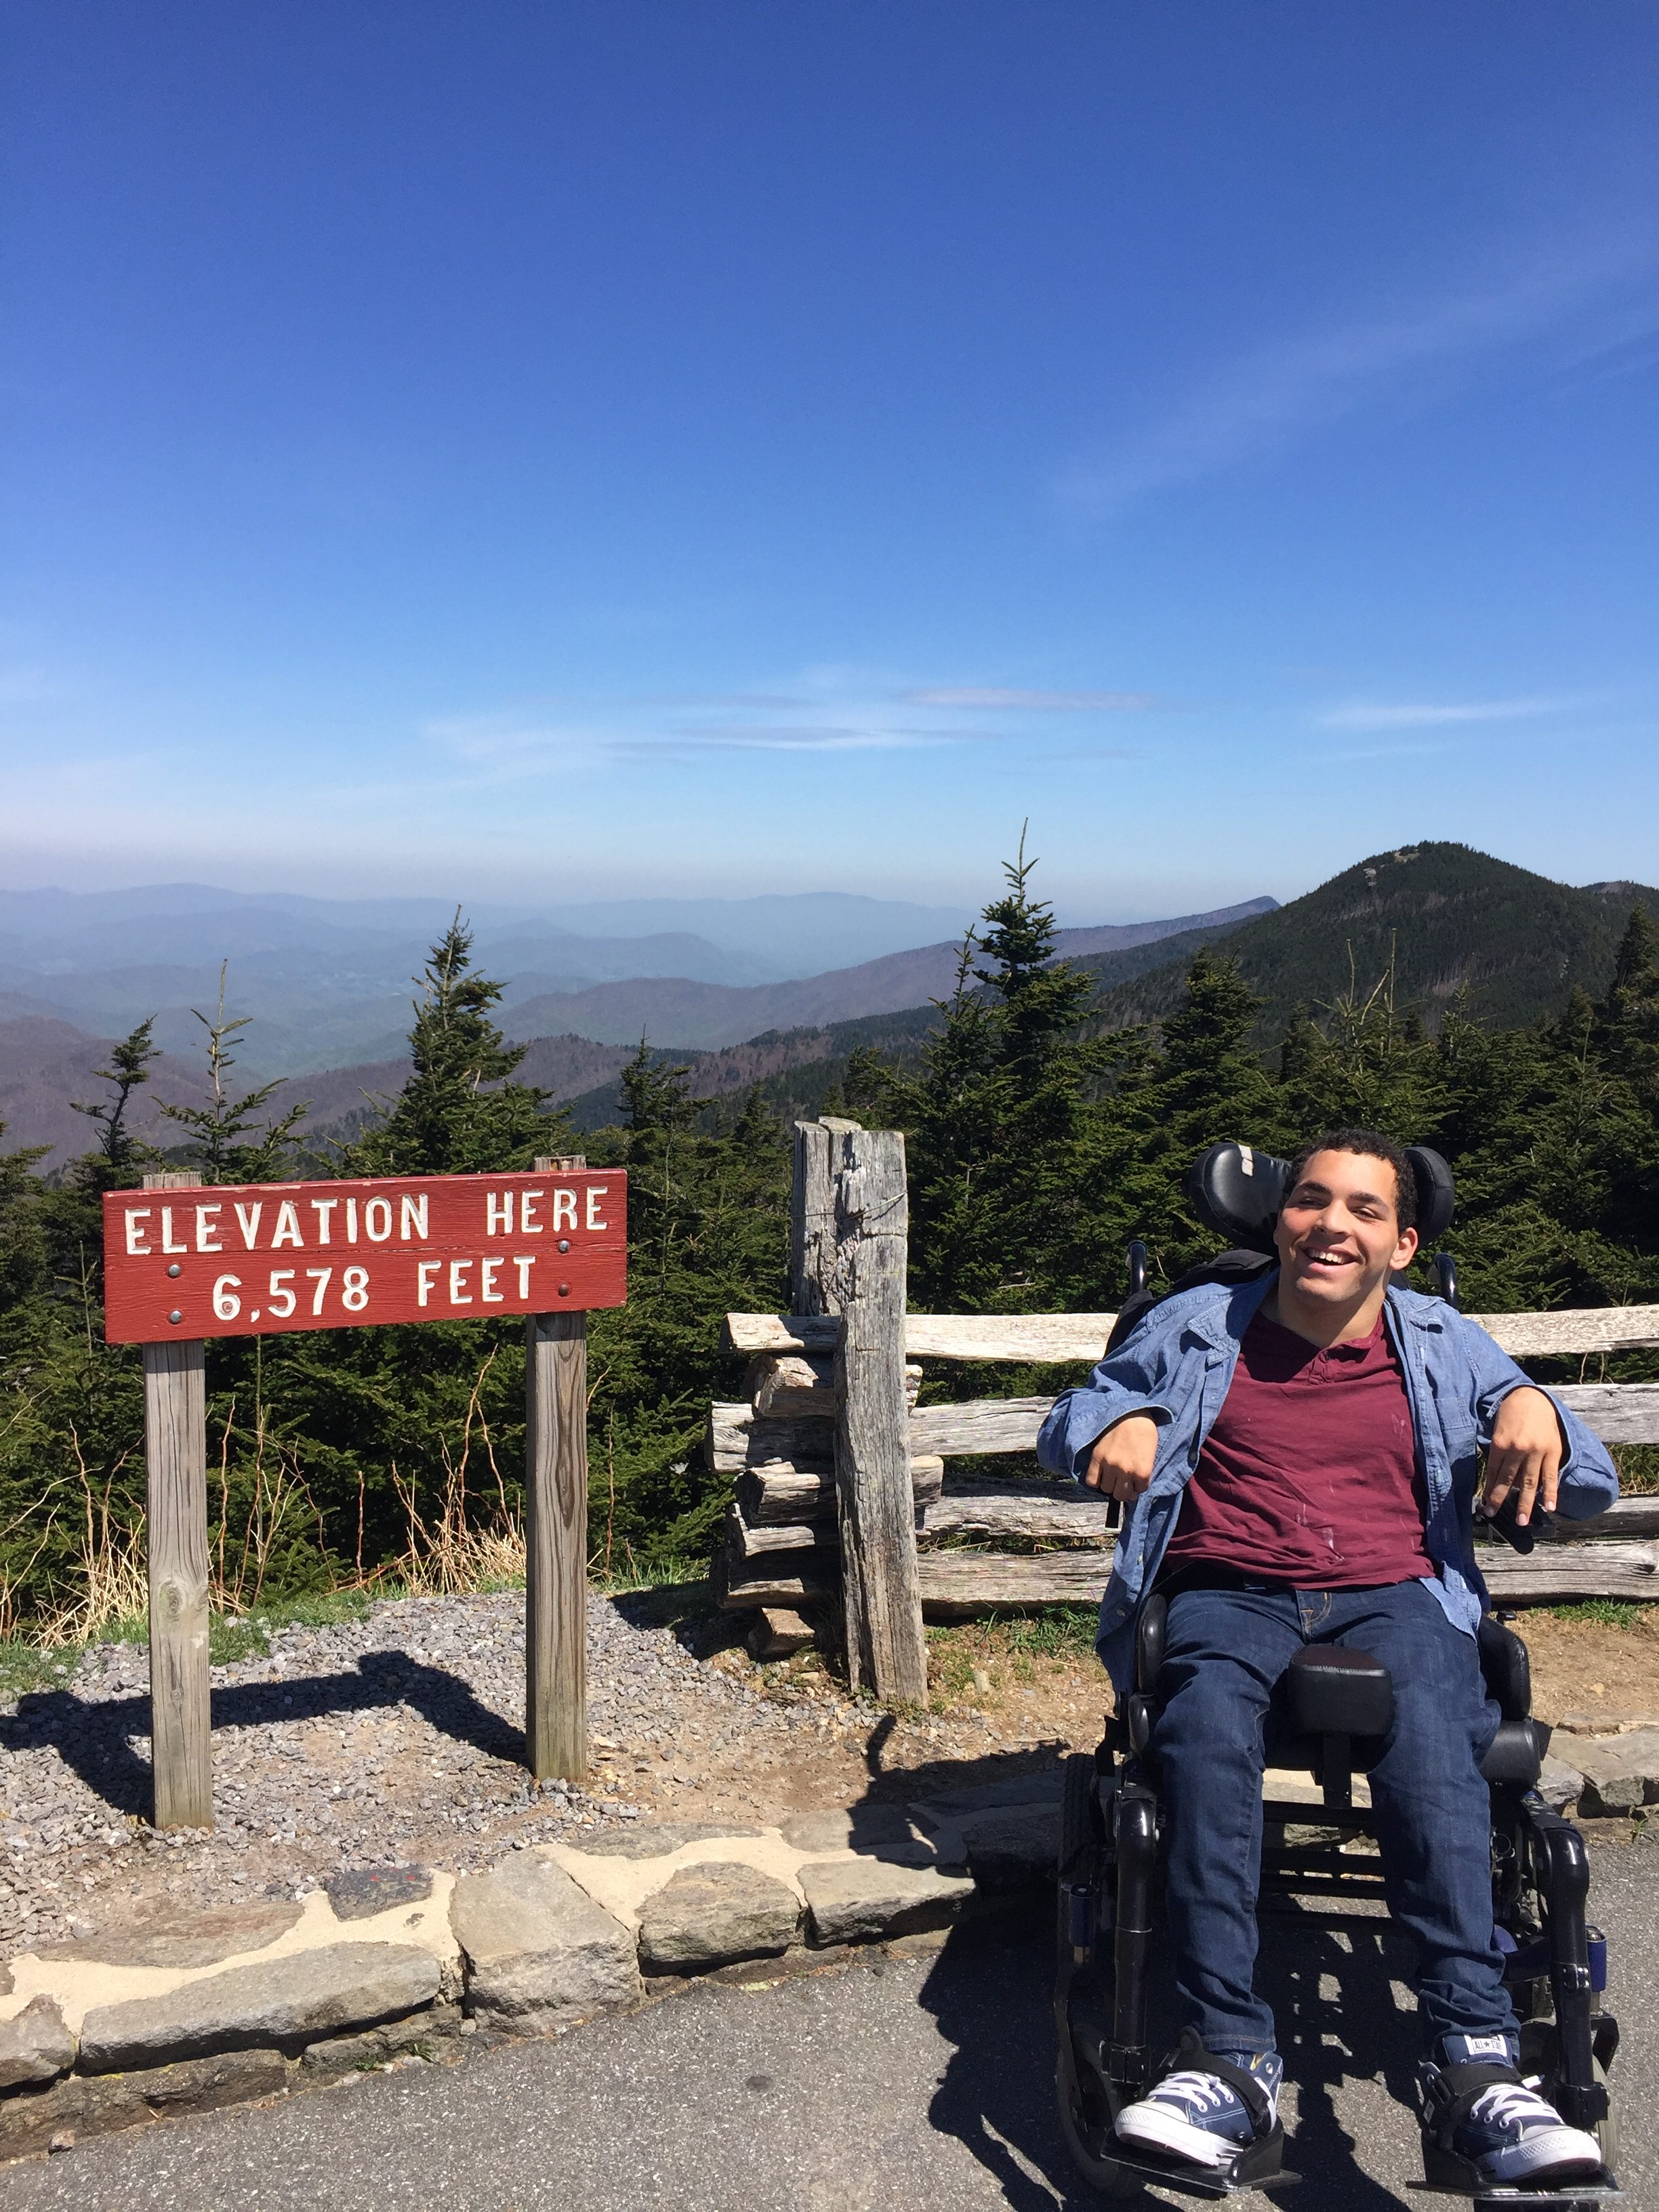 Asheville, NC – April 2019 – Accessible? YES